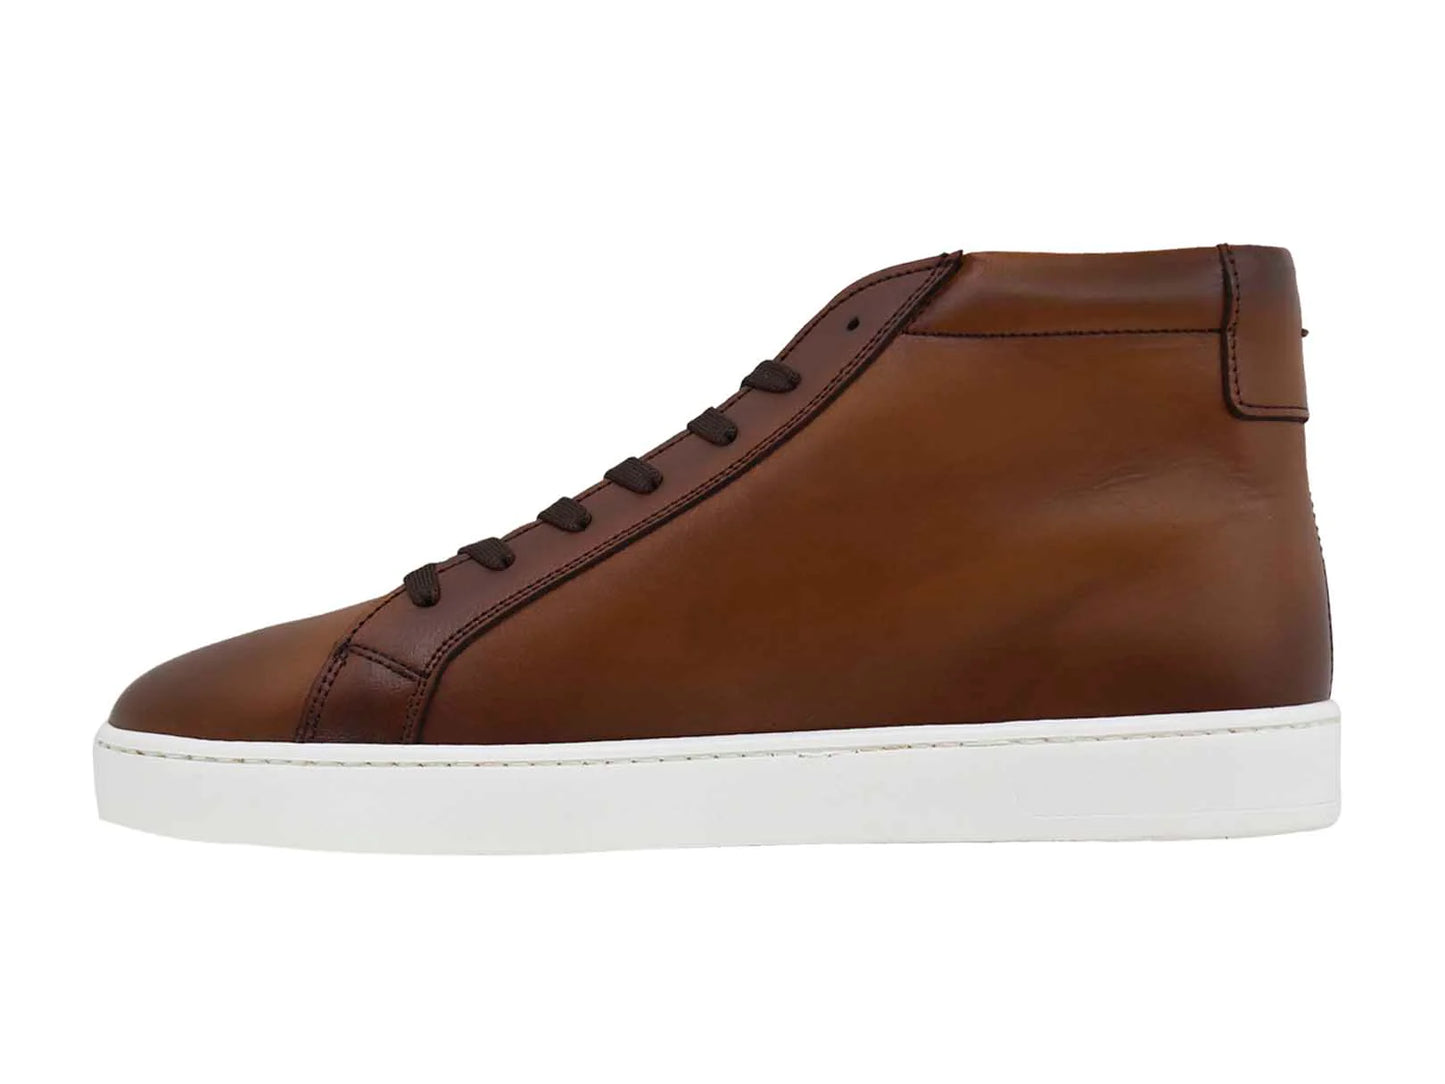 High Top Urban Sneakers, Leather by Triples